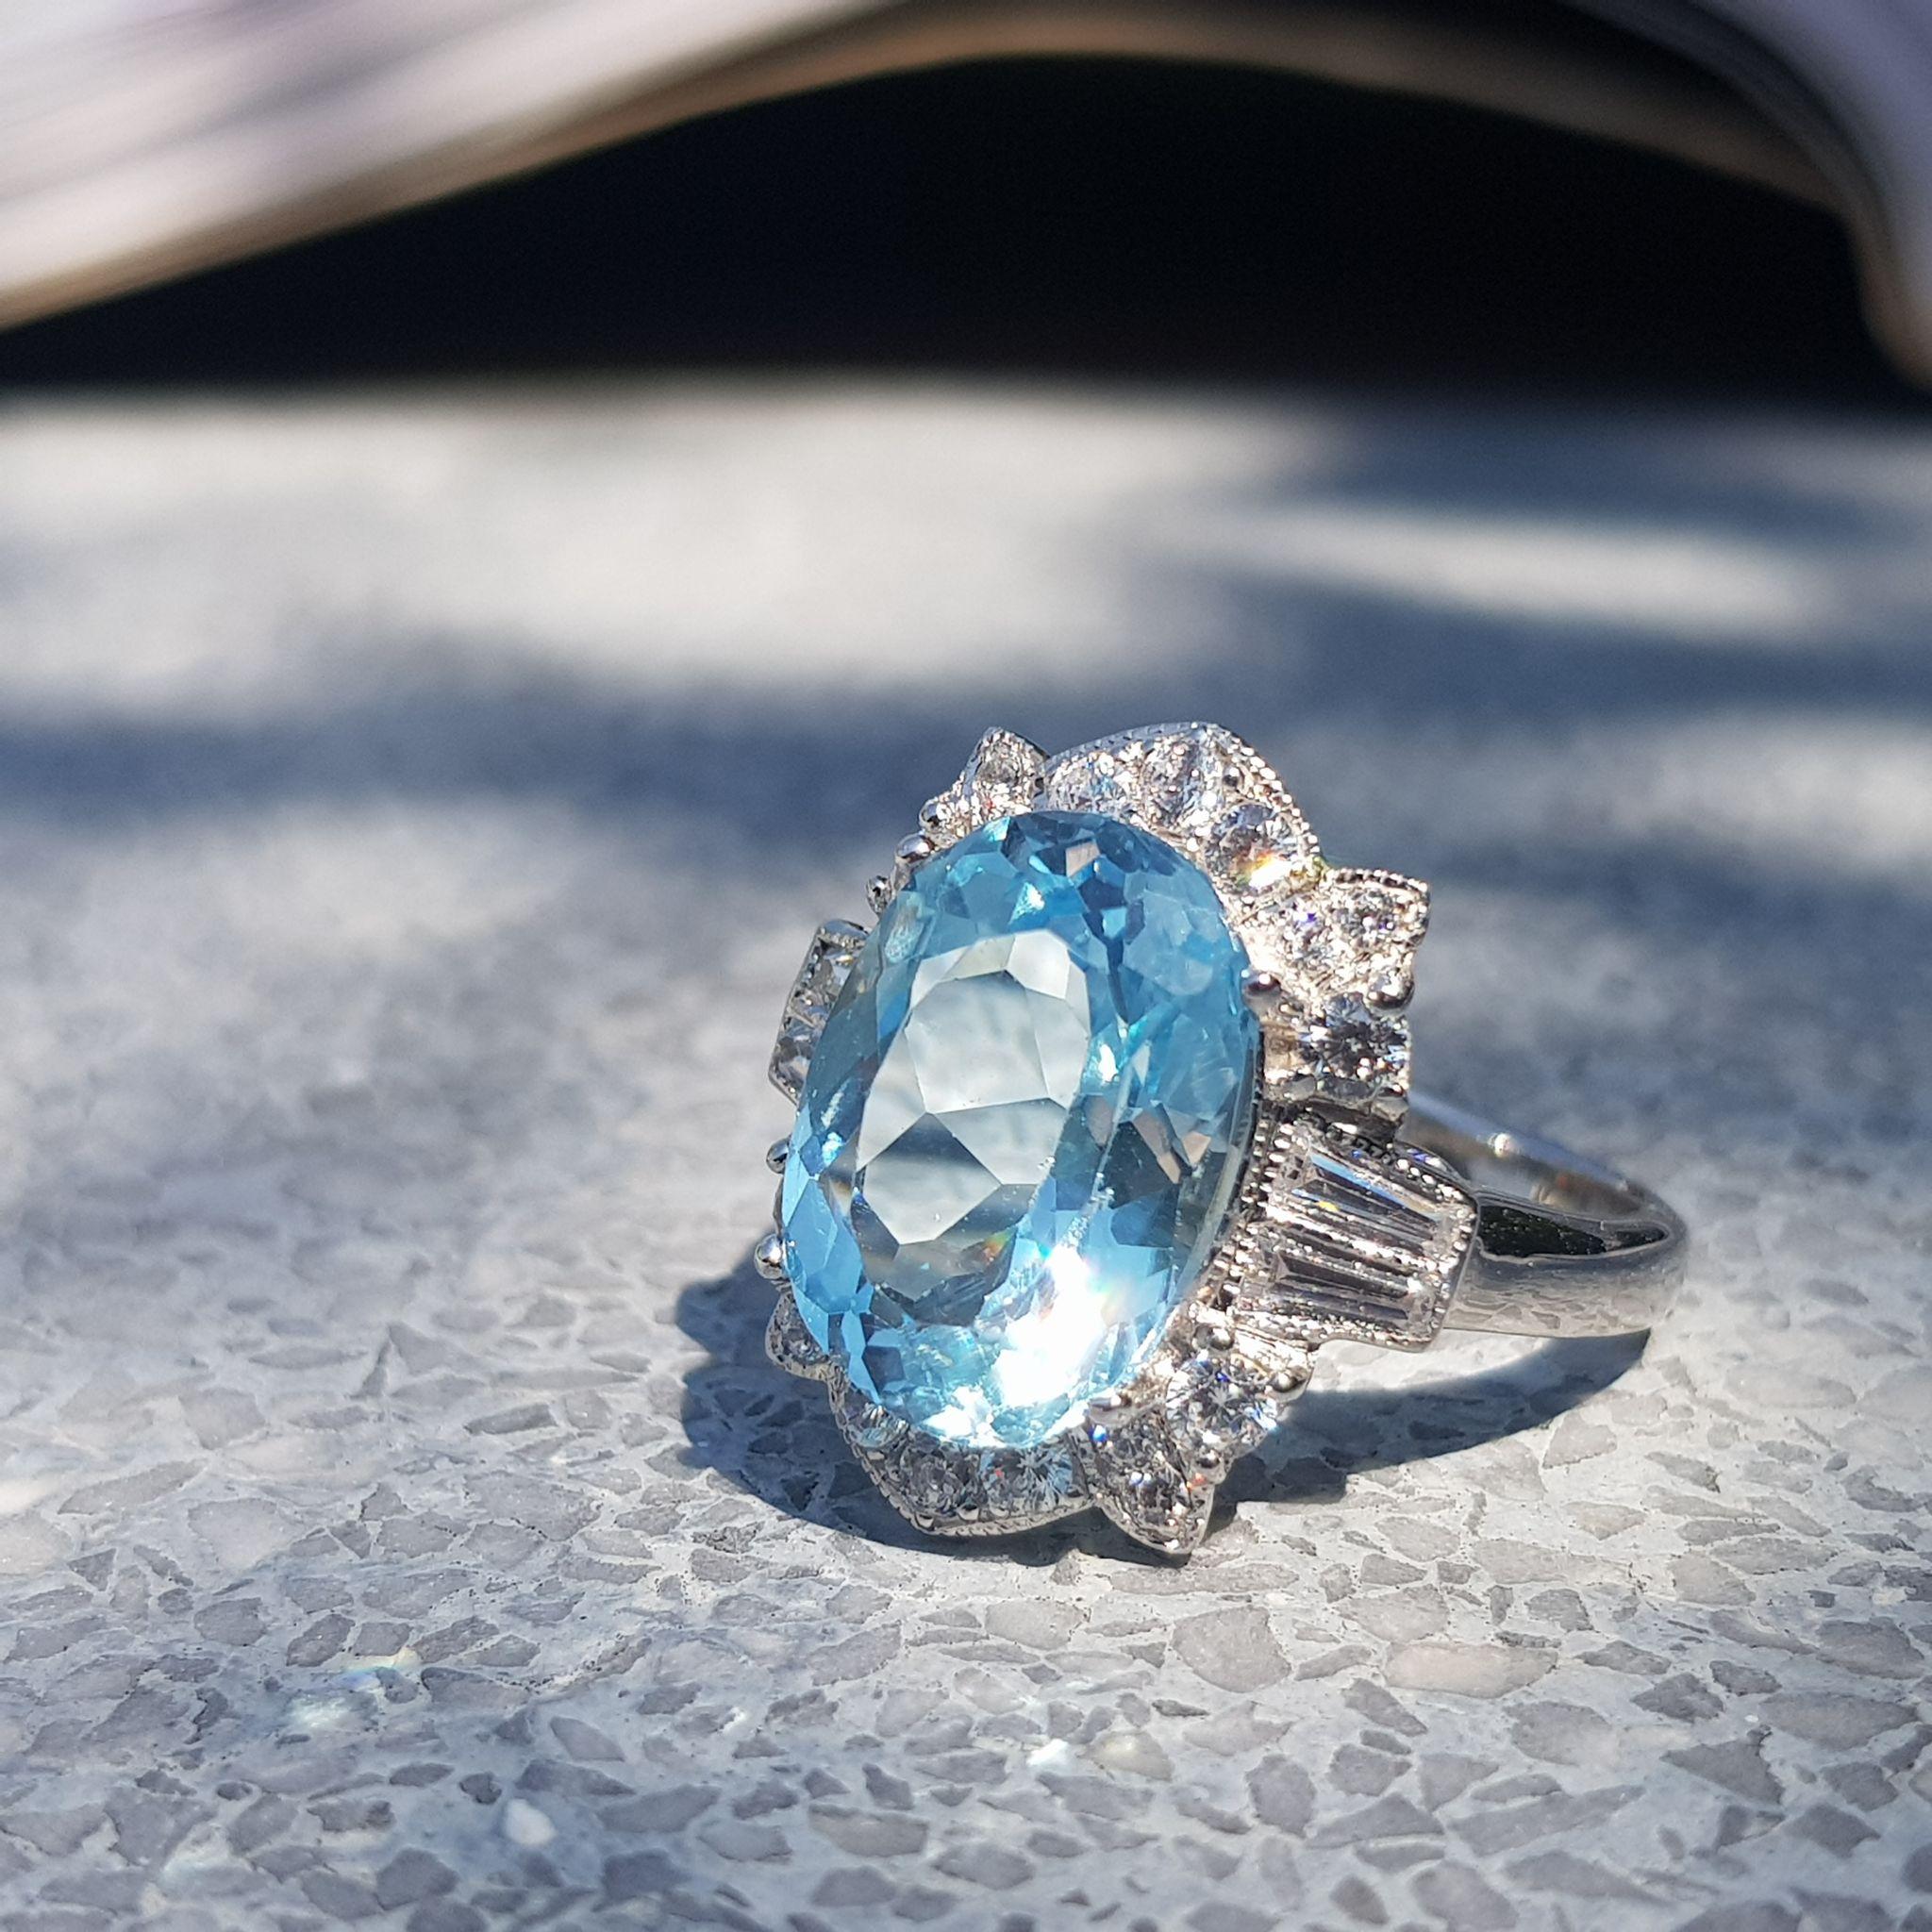 For Sale:  7.25 Ct. Oval Blue Topaz and Diamond Cocktail Ring in 18K White Gold 8